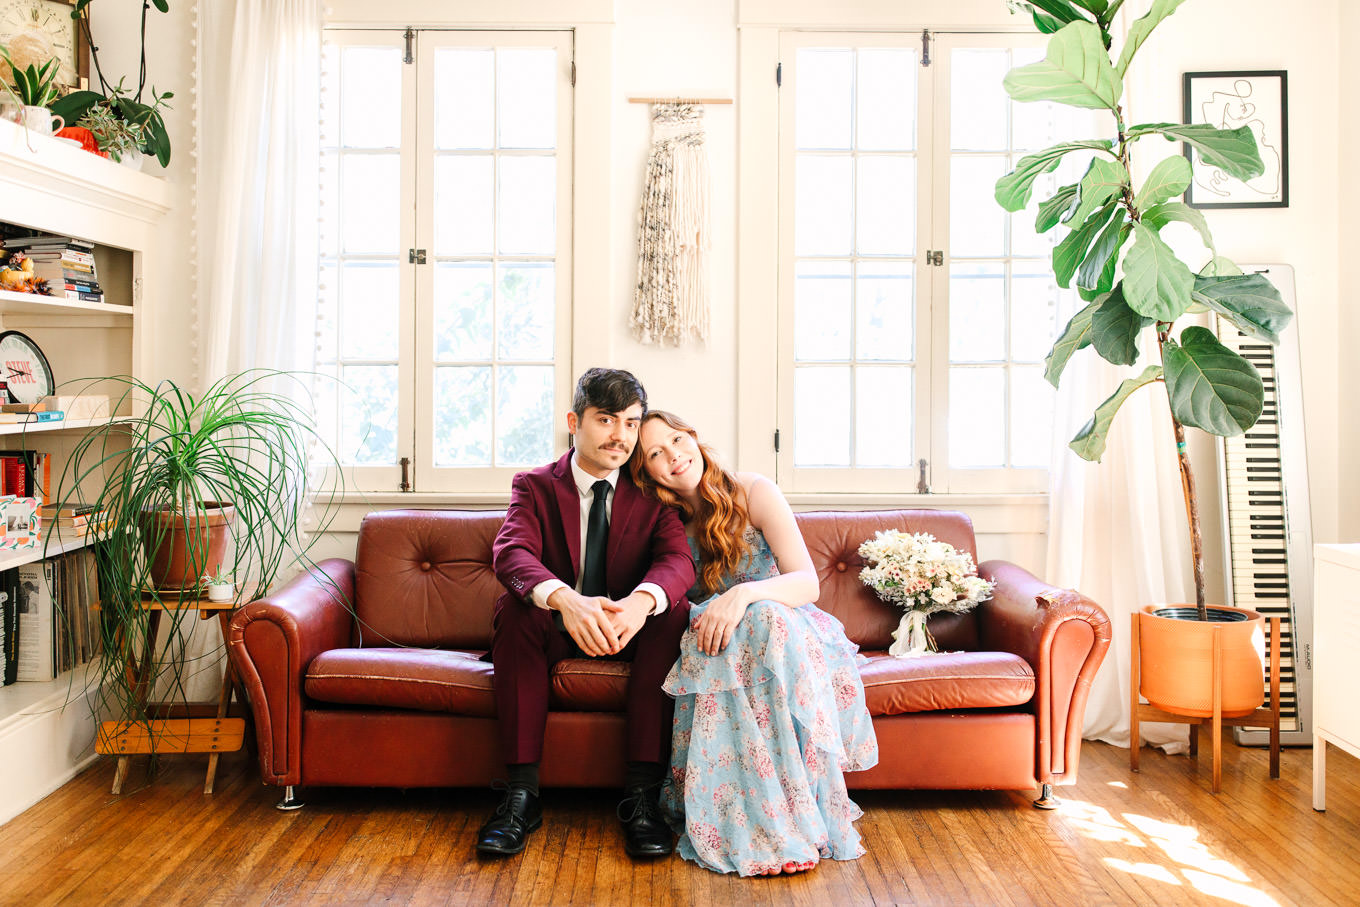 Couple relaxing at home in fancy attire | Los Angeles Arboretum Elopement | Colorful and elevated wedding photography for fun-loving couples in Southern California | #LosAngelesElopement #elopement #LAarboretum #LAskyline #elopementphotos   Source: Mary Costa Photography | Los Angeles